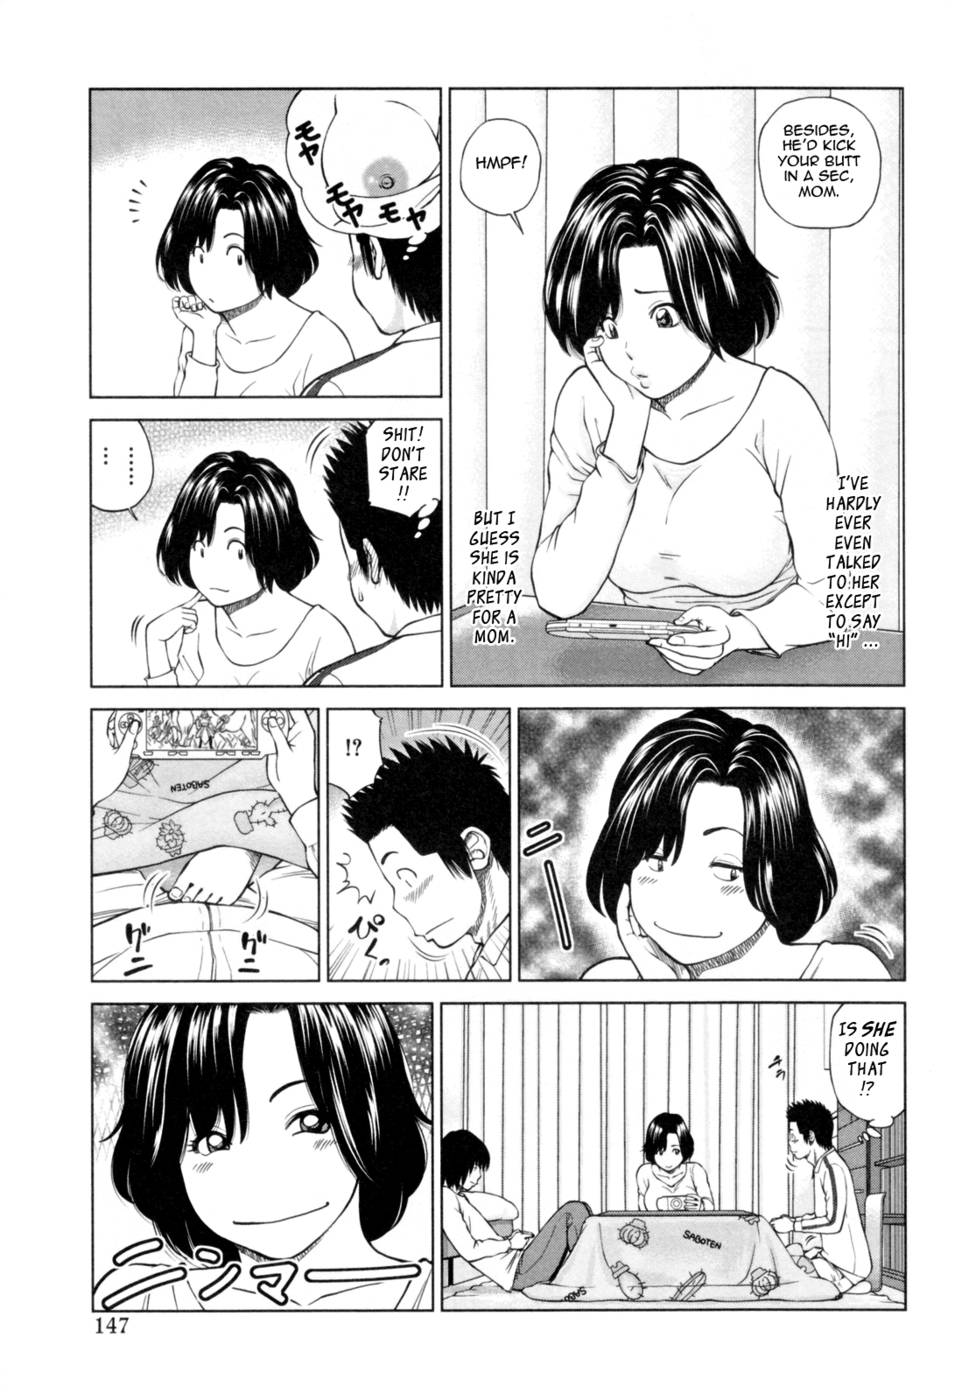 Hentai Manga Comic-32 Year Old Unsatisfied Wife-Chapter 8-Seduced By My Friend's Mom-5